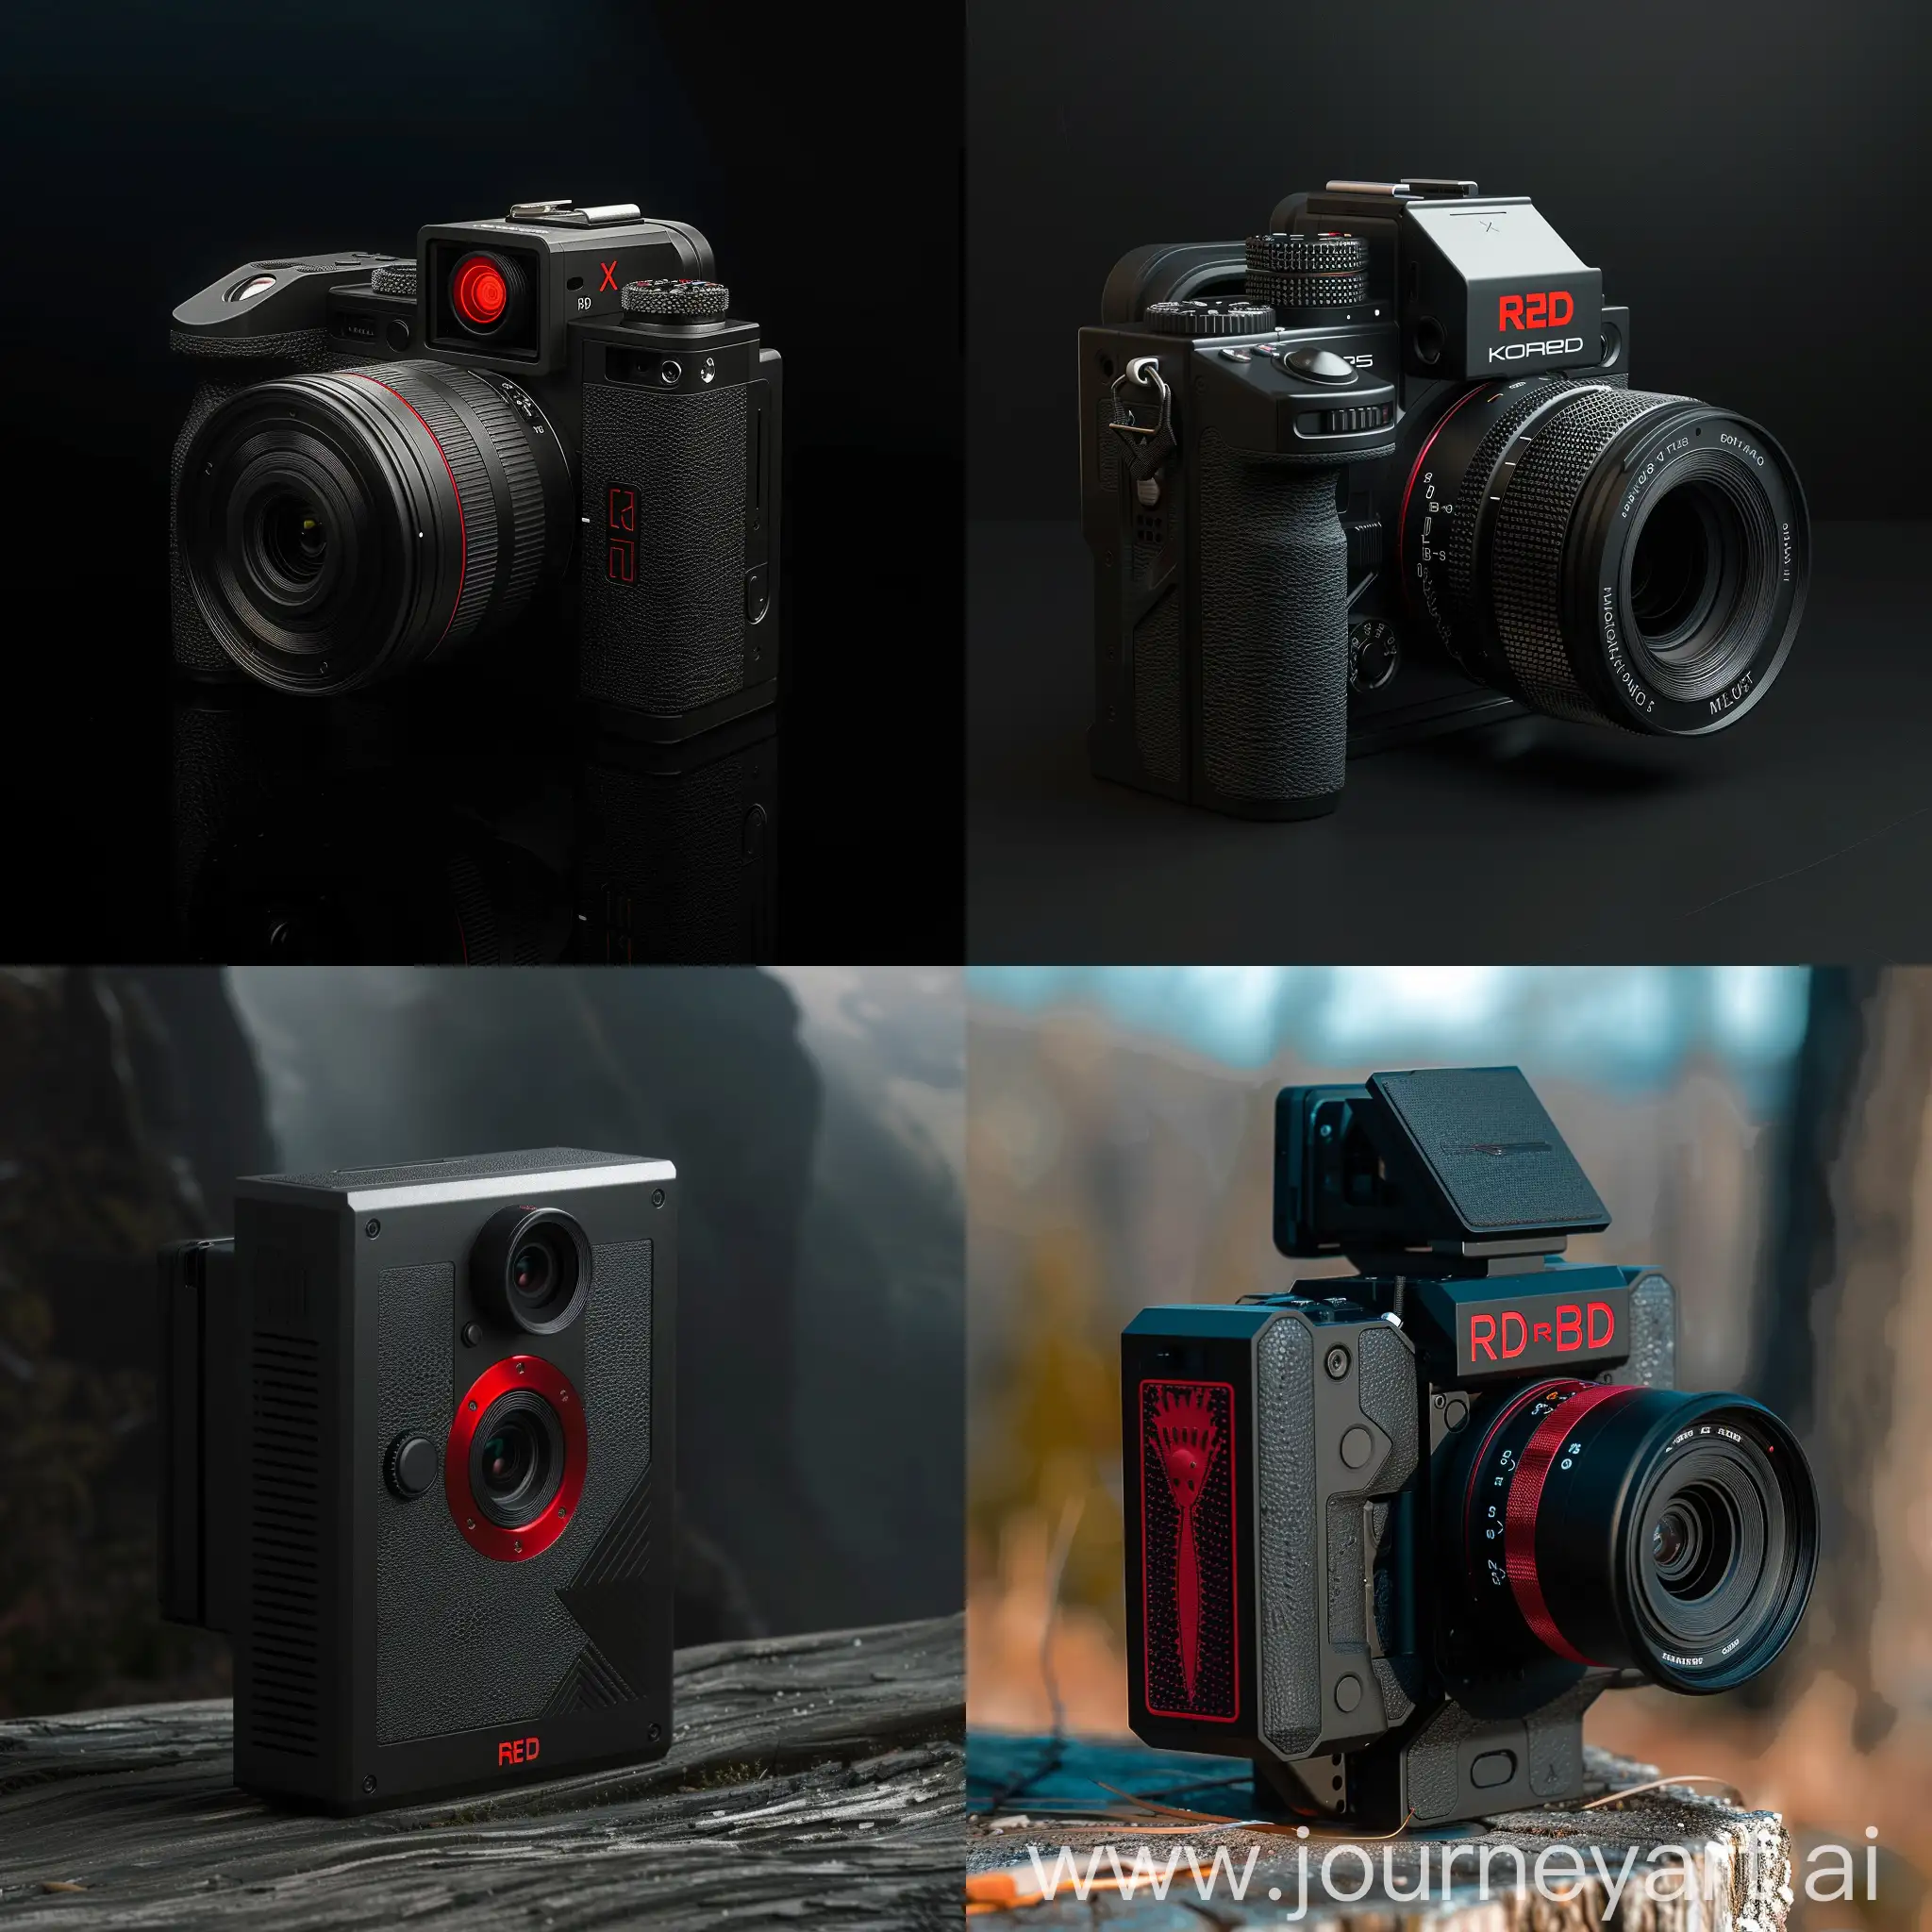 A new RED camera that looks like the Komodo X